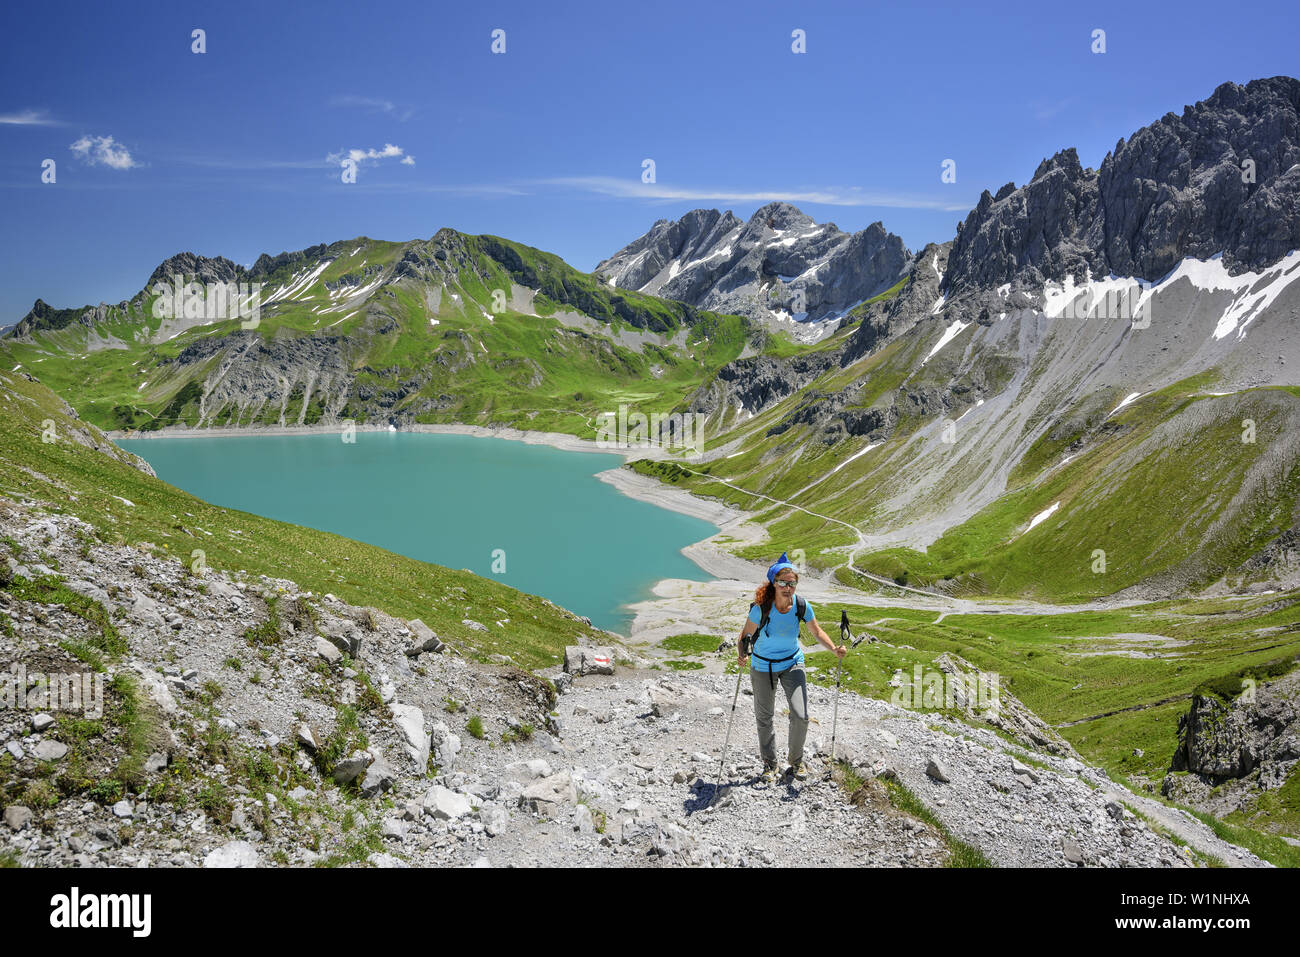 Woman hiking with lake Luenersee in background, lake Luenersee, Raetikon trail, Raetikon, Vorarlberg, Austria Stock Photo